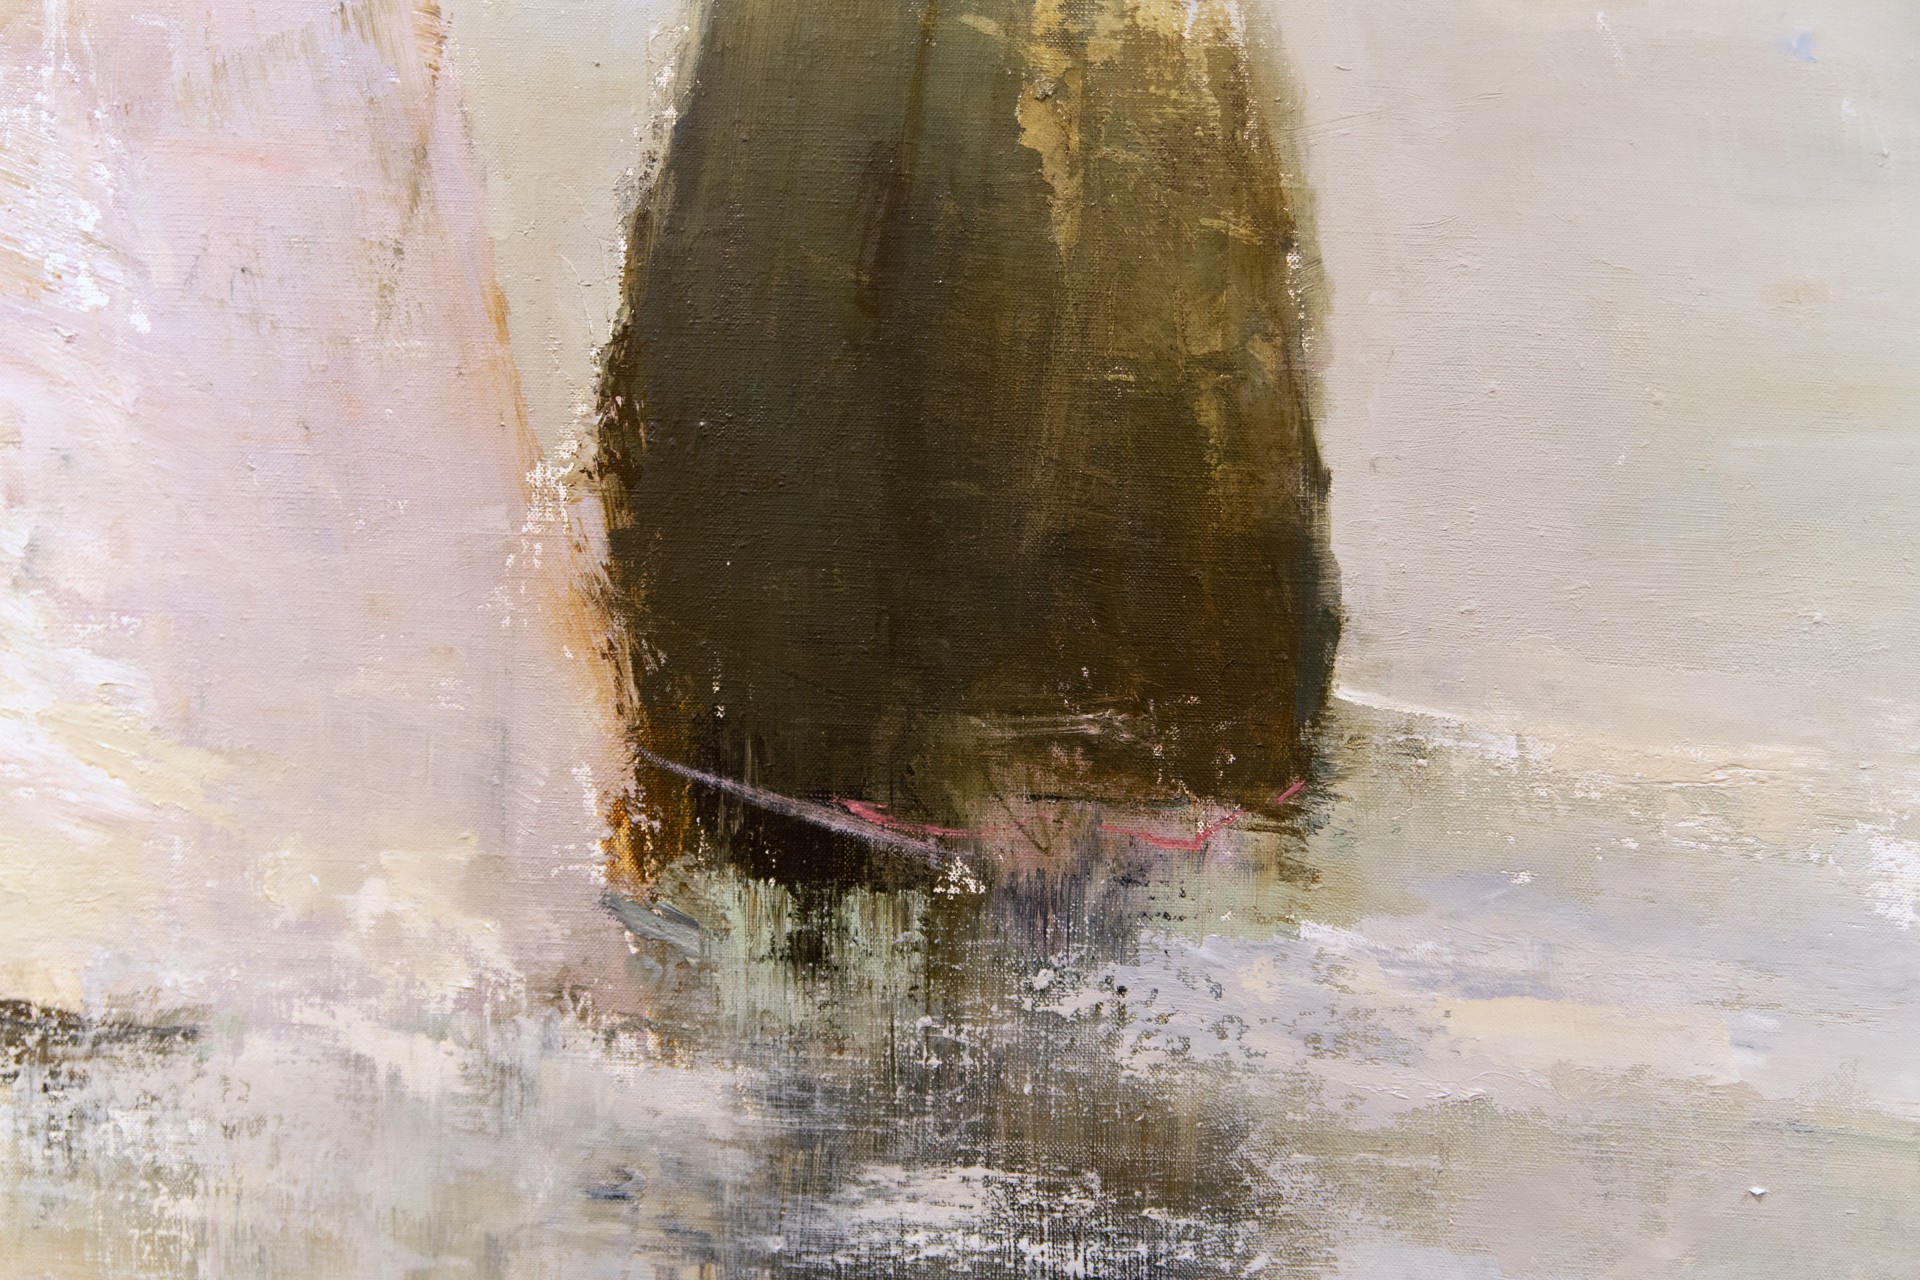 Ask Damask roses why in June they bloom by France Jodoin